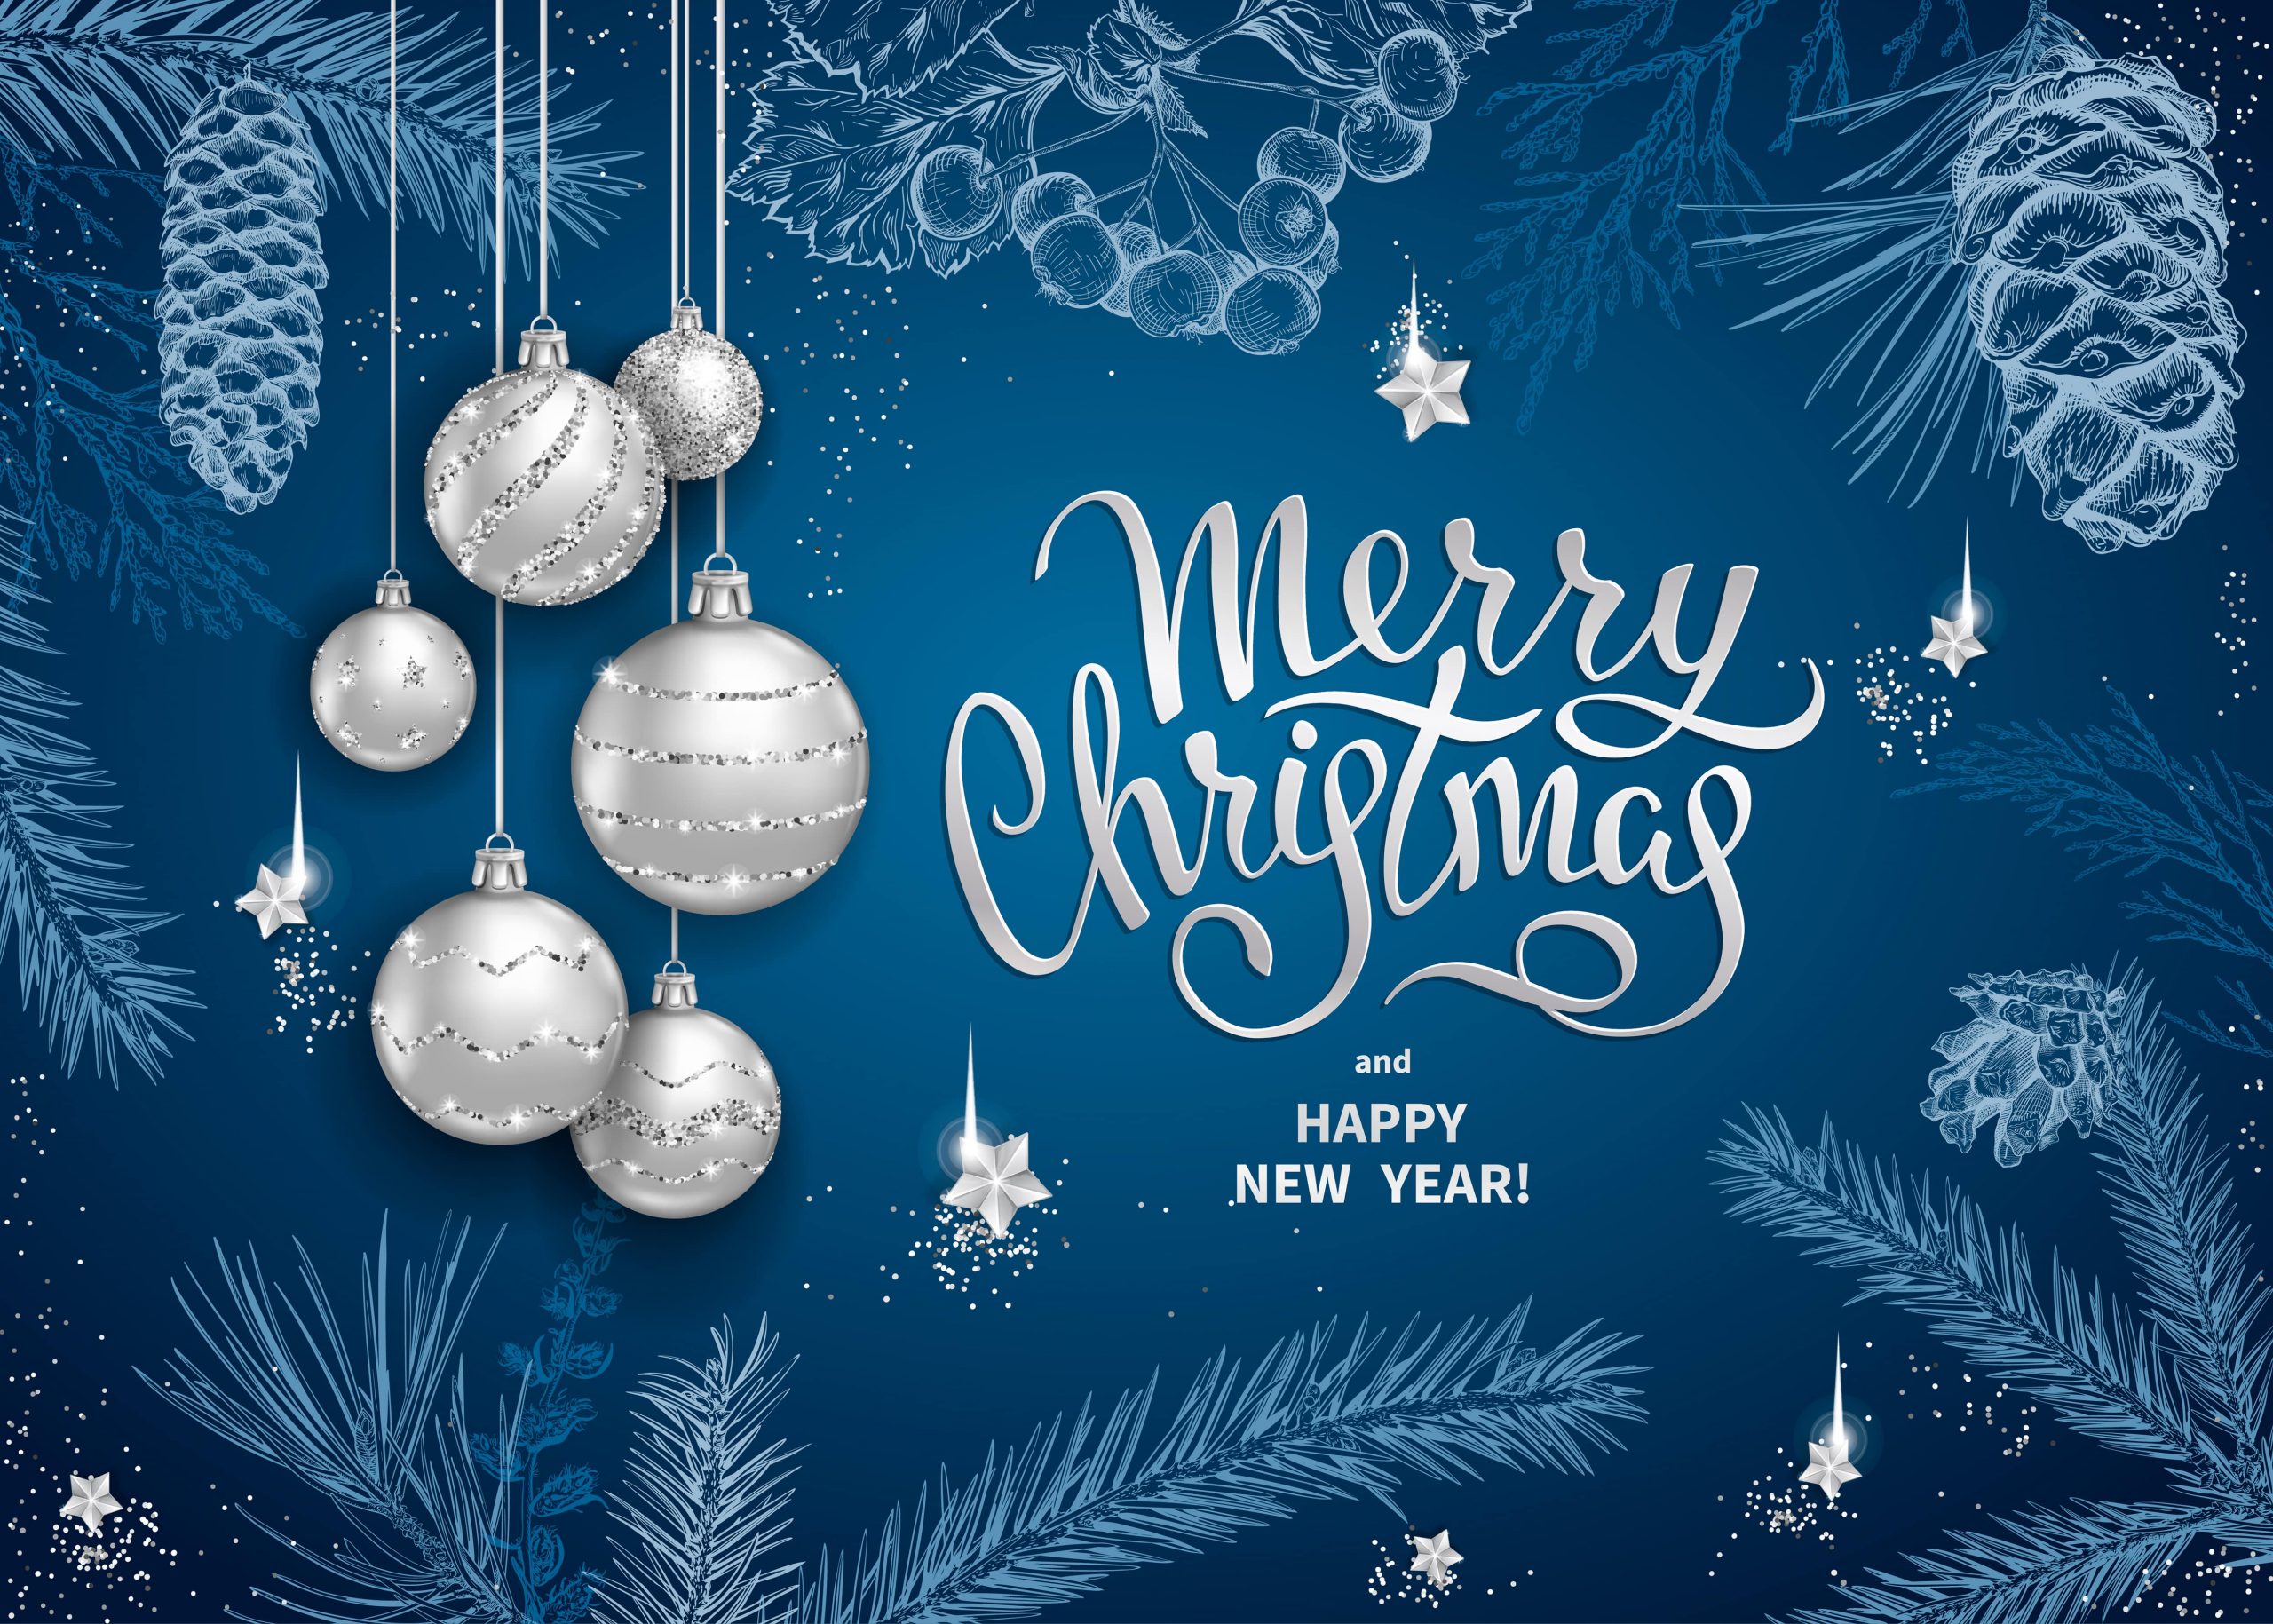 Season’s Greetings from us all at Westerhill Homes